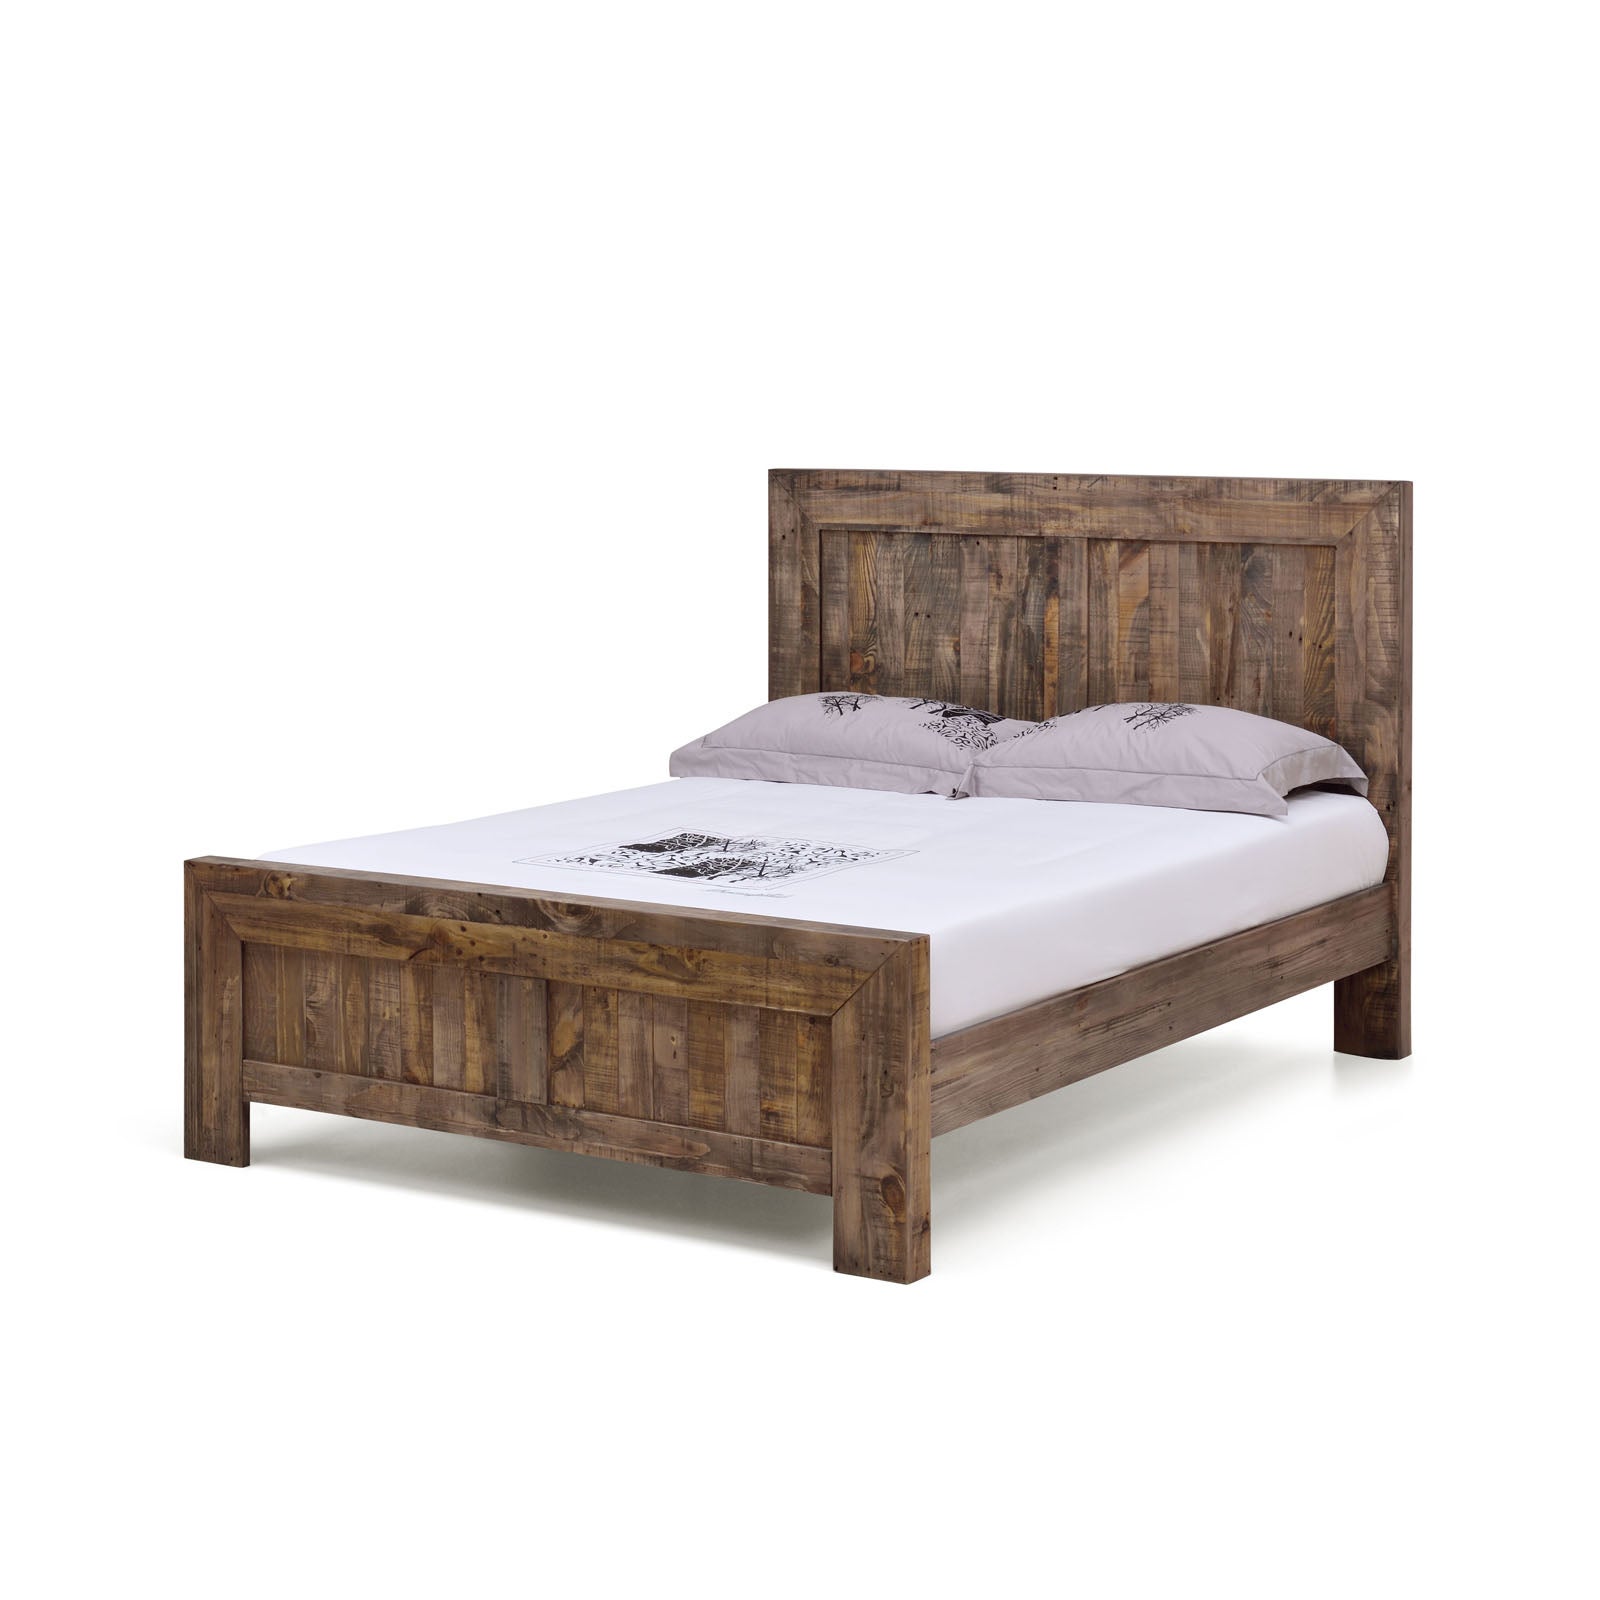 Boston Recycled Solid Pine Rustic Timber Queen Size Bed Frame Buy Queen Bed Frame 177475 